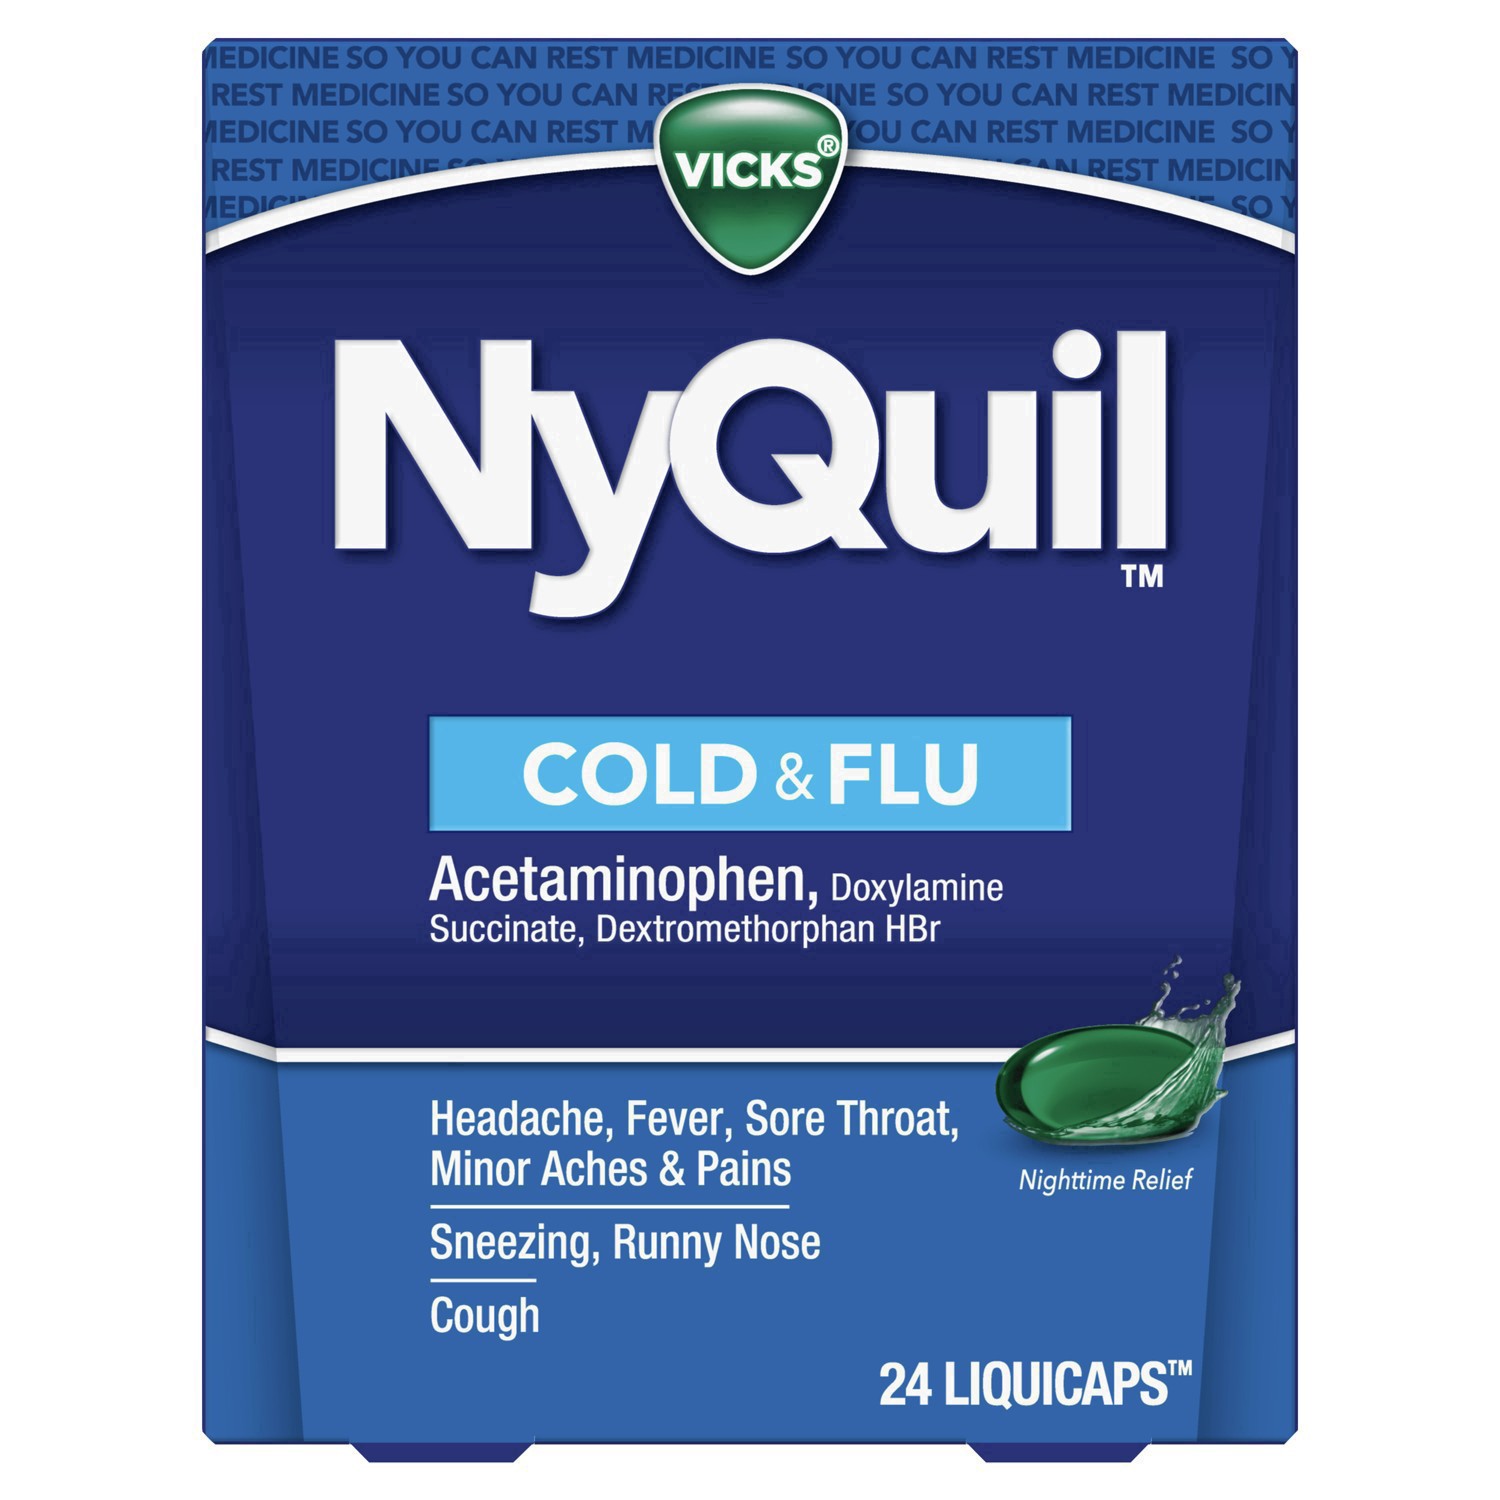 slide 21 of 68, NyQuil Vicks NyQuil Cold & Flu Medicine LiquiCaps - 24ct, 24 ct